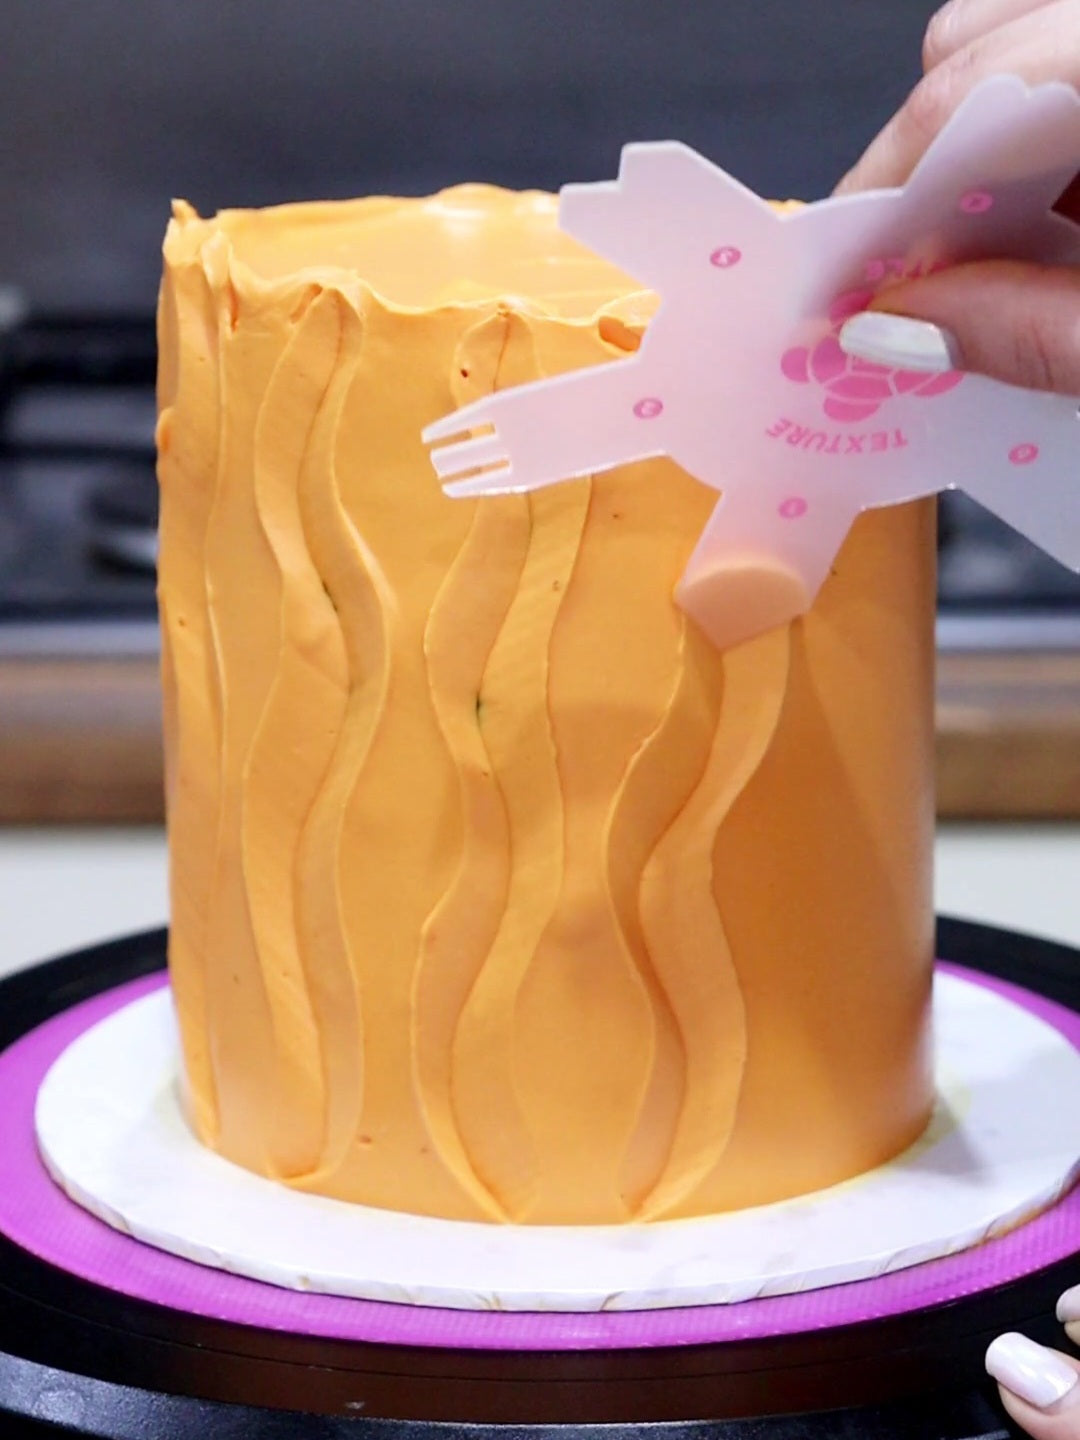 How to Use Textured Cake Scrapers - Cake by Courtney